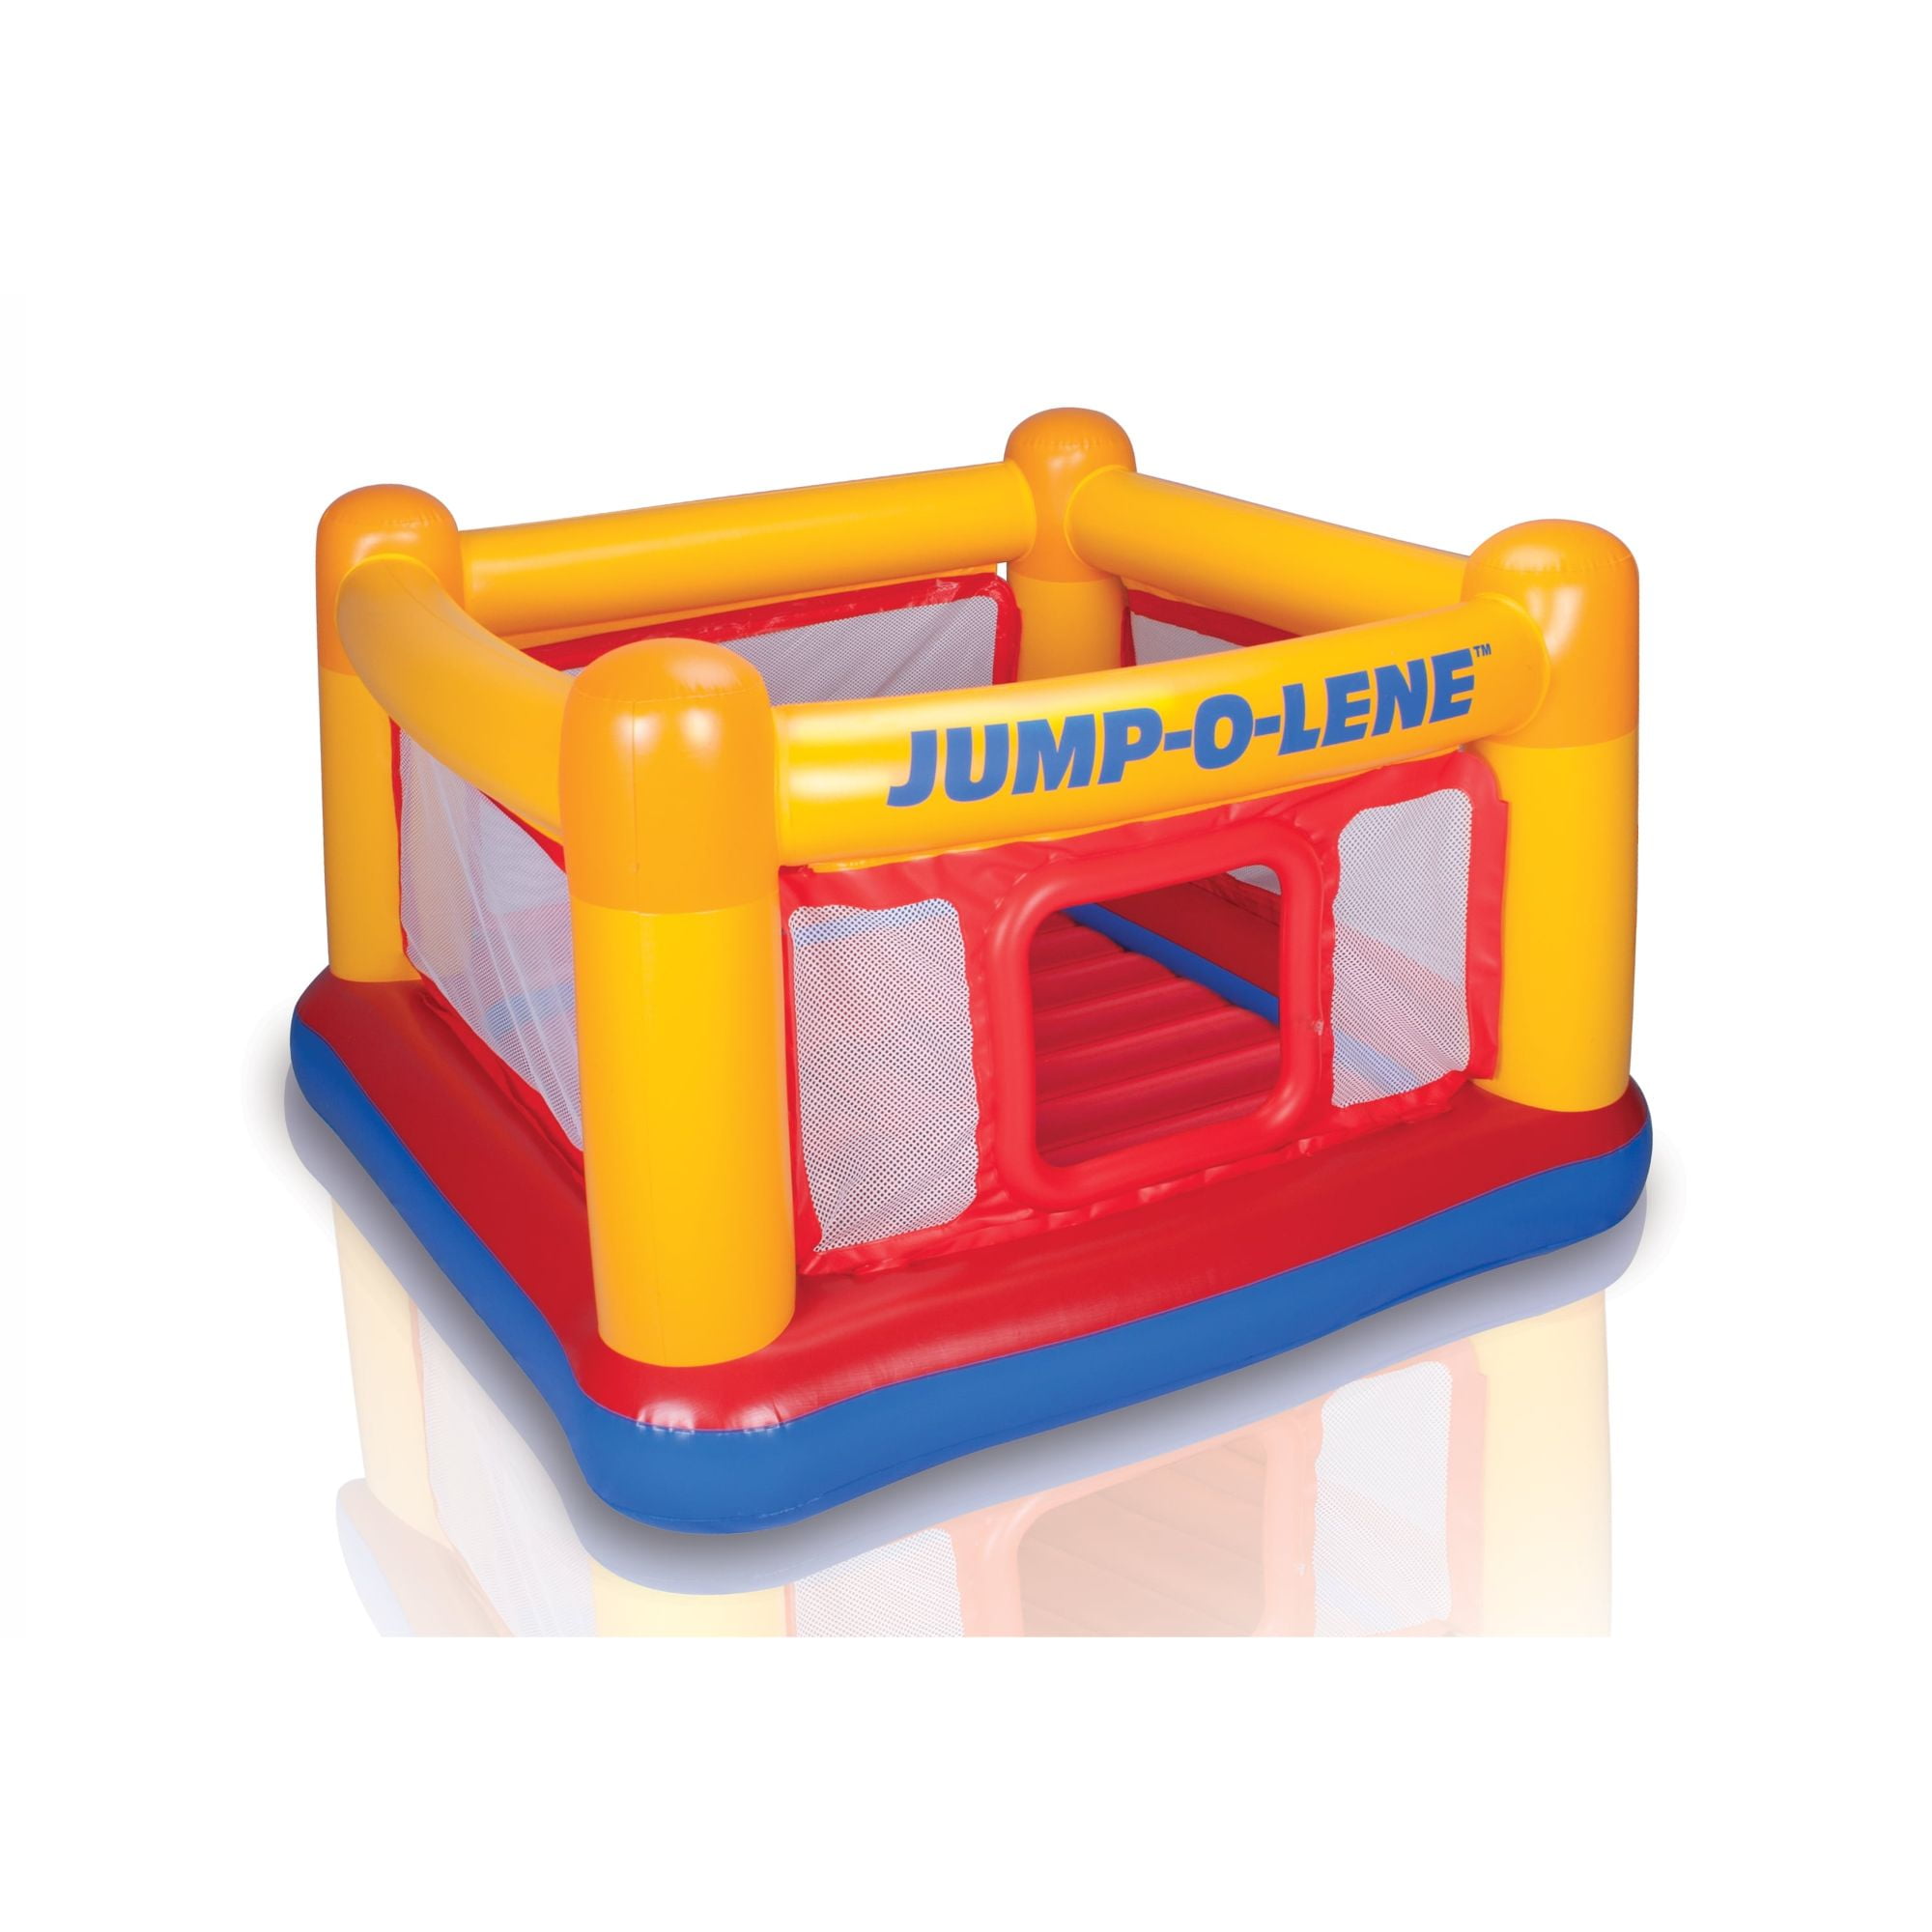 Intex Jump O Lene Inflatable Bouncer 80 X 27 for Ages 3 6 for sale online 